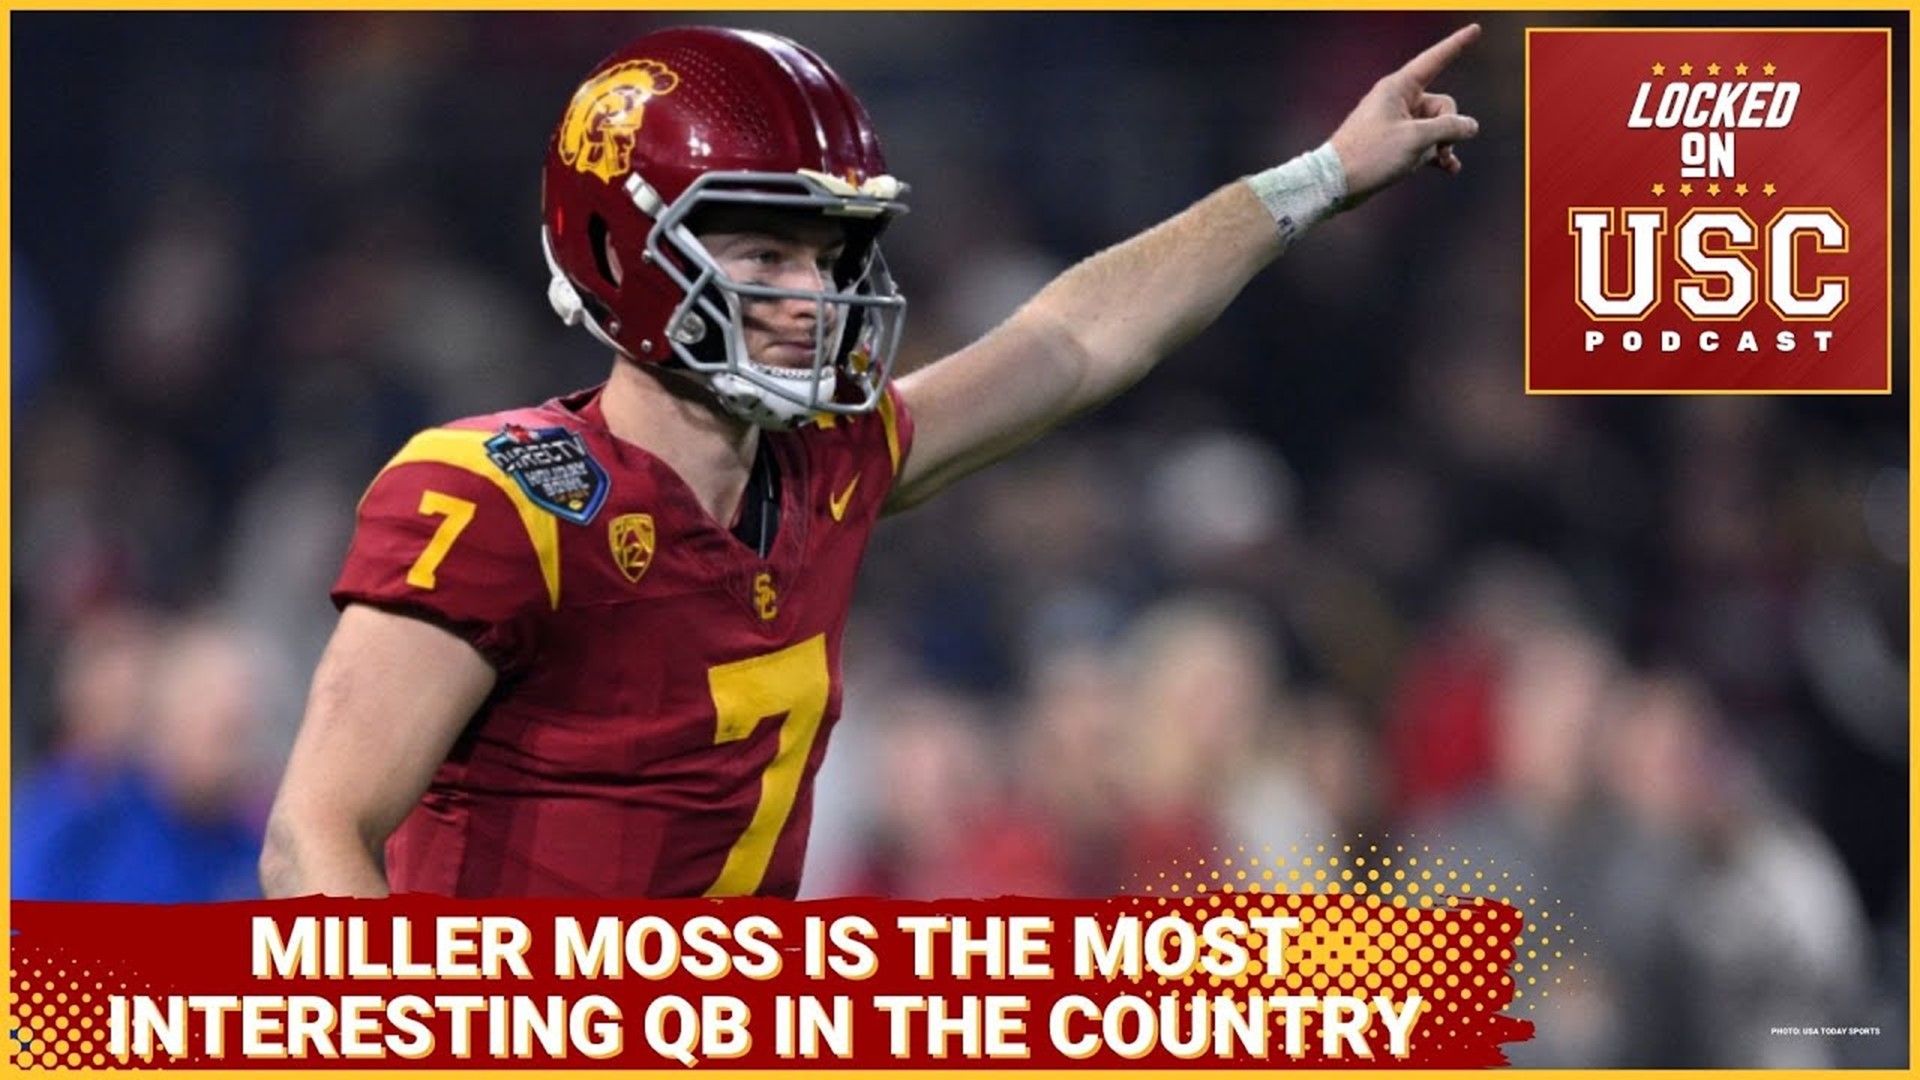 Miller Moss has had one career start at USC, and in that start, Moss threw 6 touchdowns and 374 yards against one of the better defenses in the country